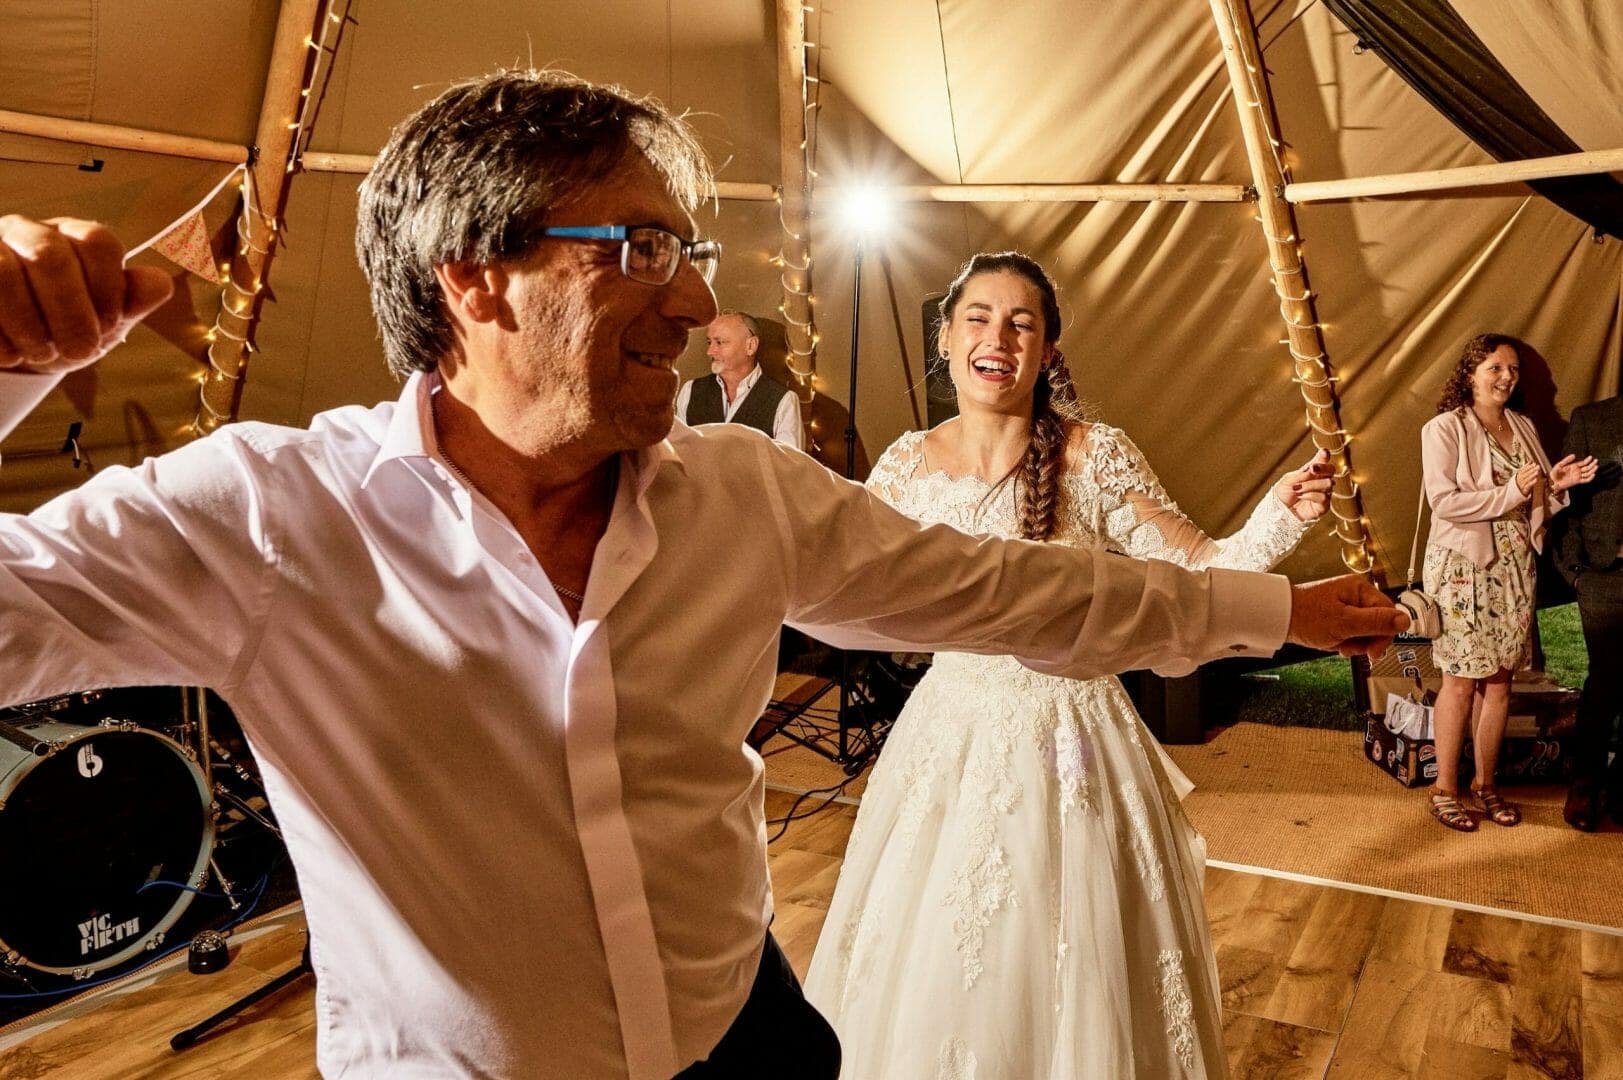 Father-daughter dance in Tipi